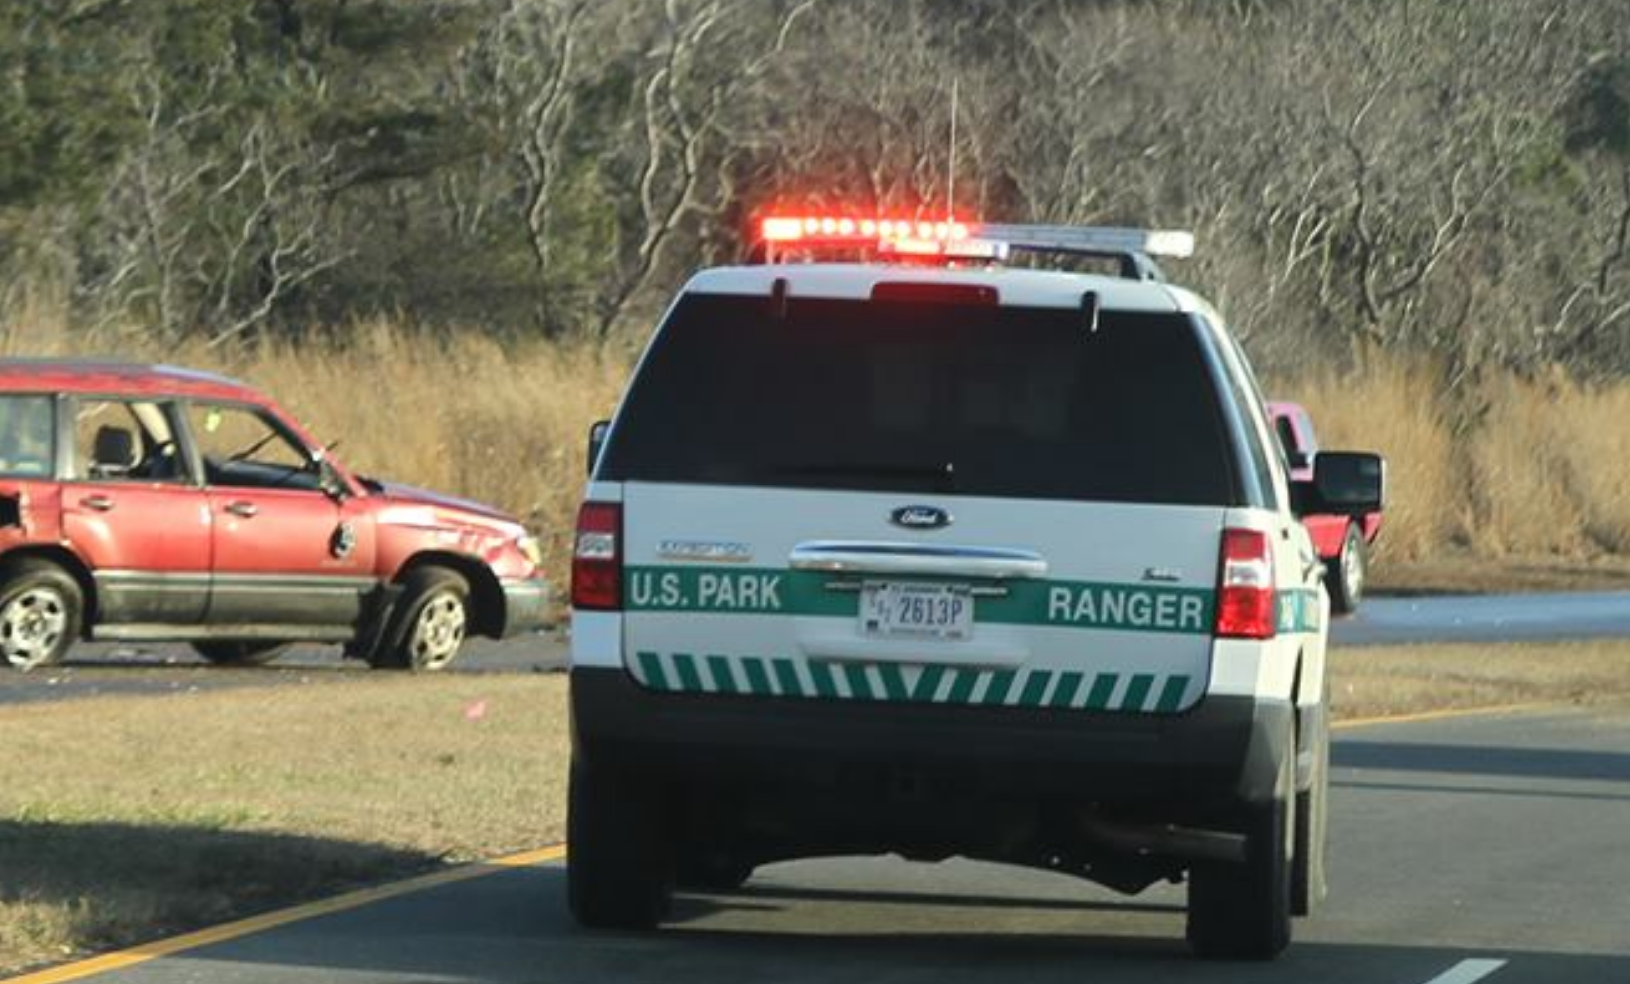  A U.S. Park Ranger on the scene of a two vehicle crash this afternoon in Sandy Hook. One of the vehicles in the crash is on the left. Photo courtesy of JSHN contributor Bill Senck. 